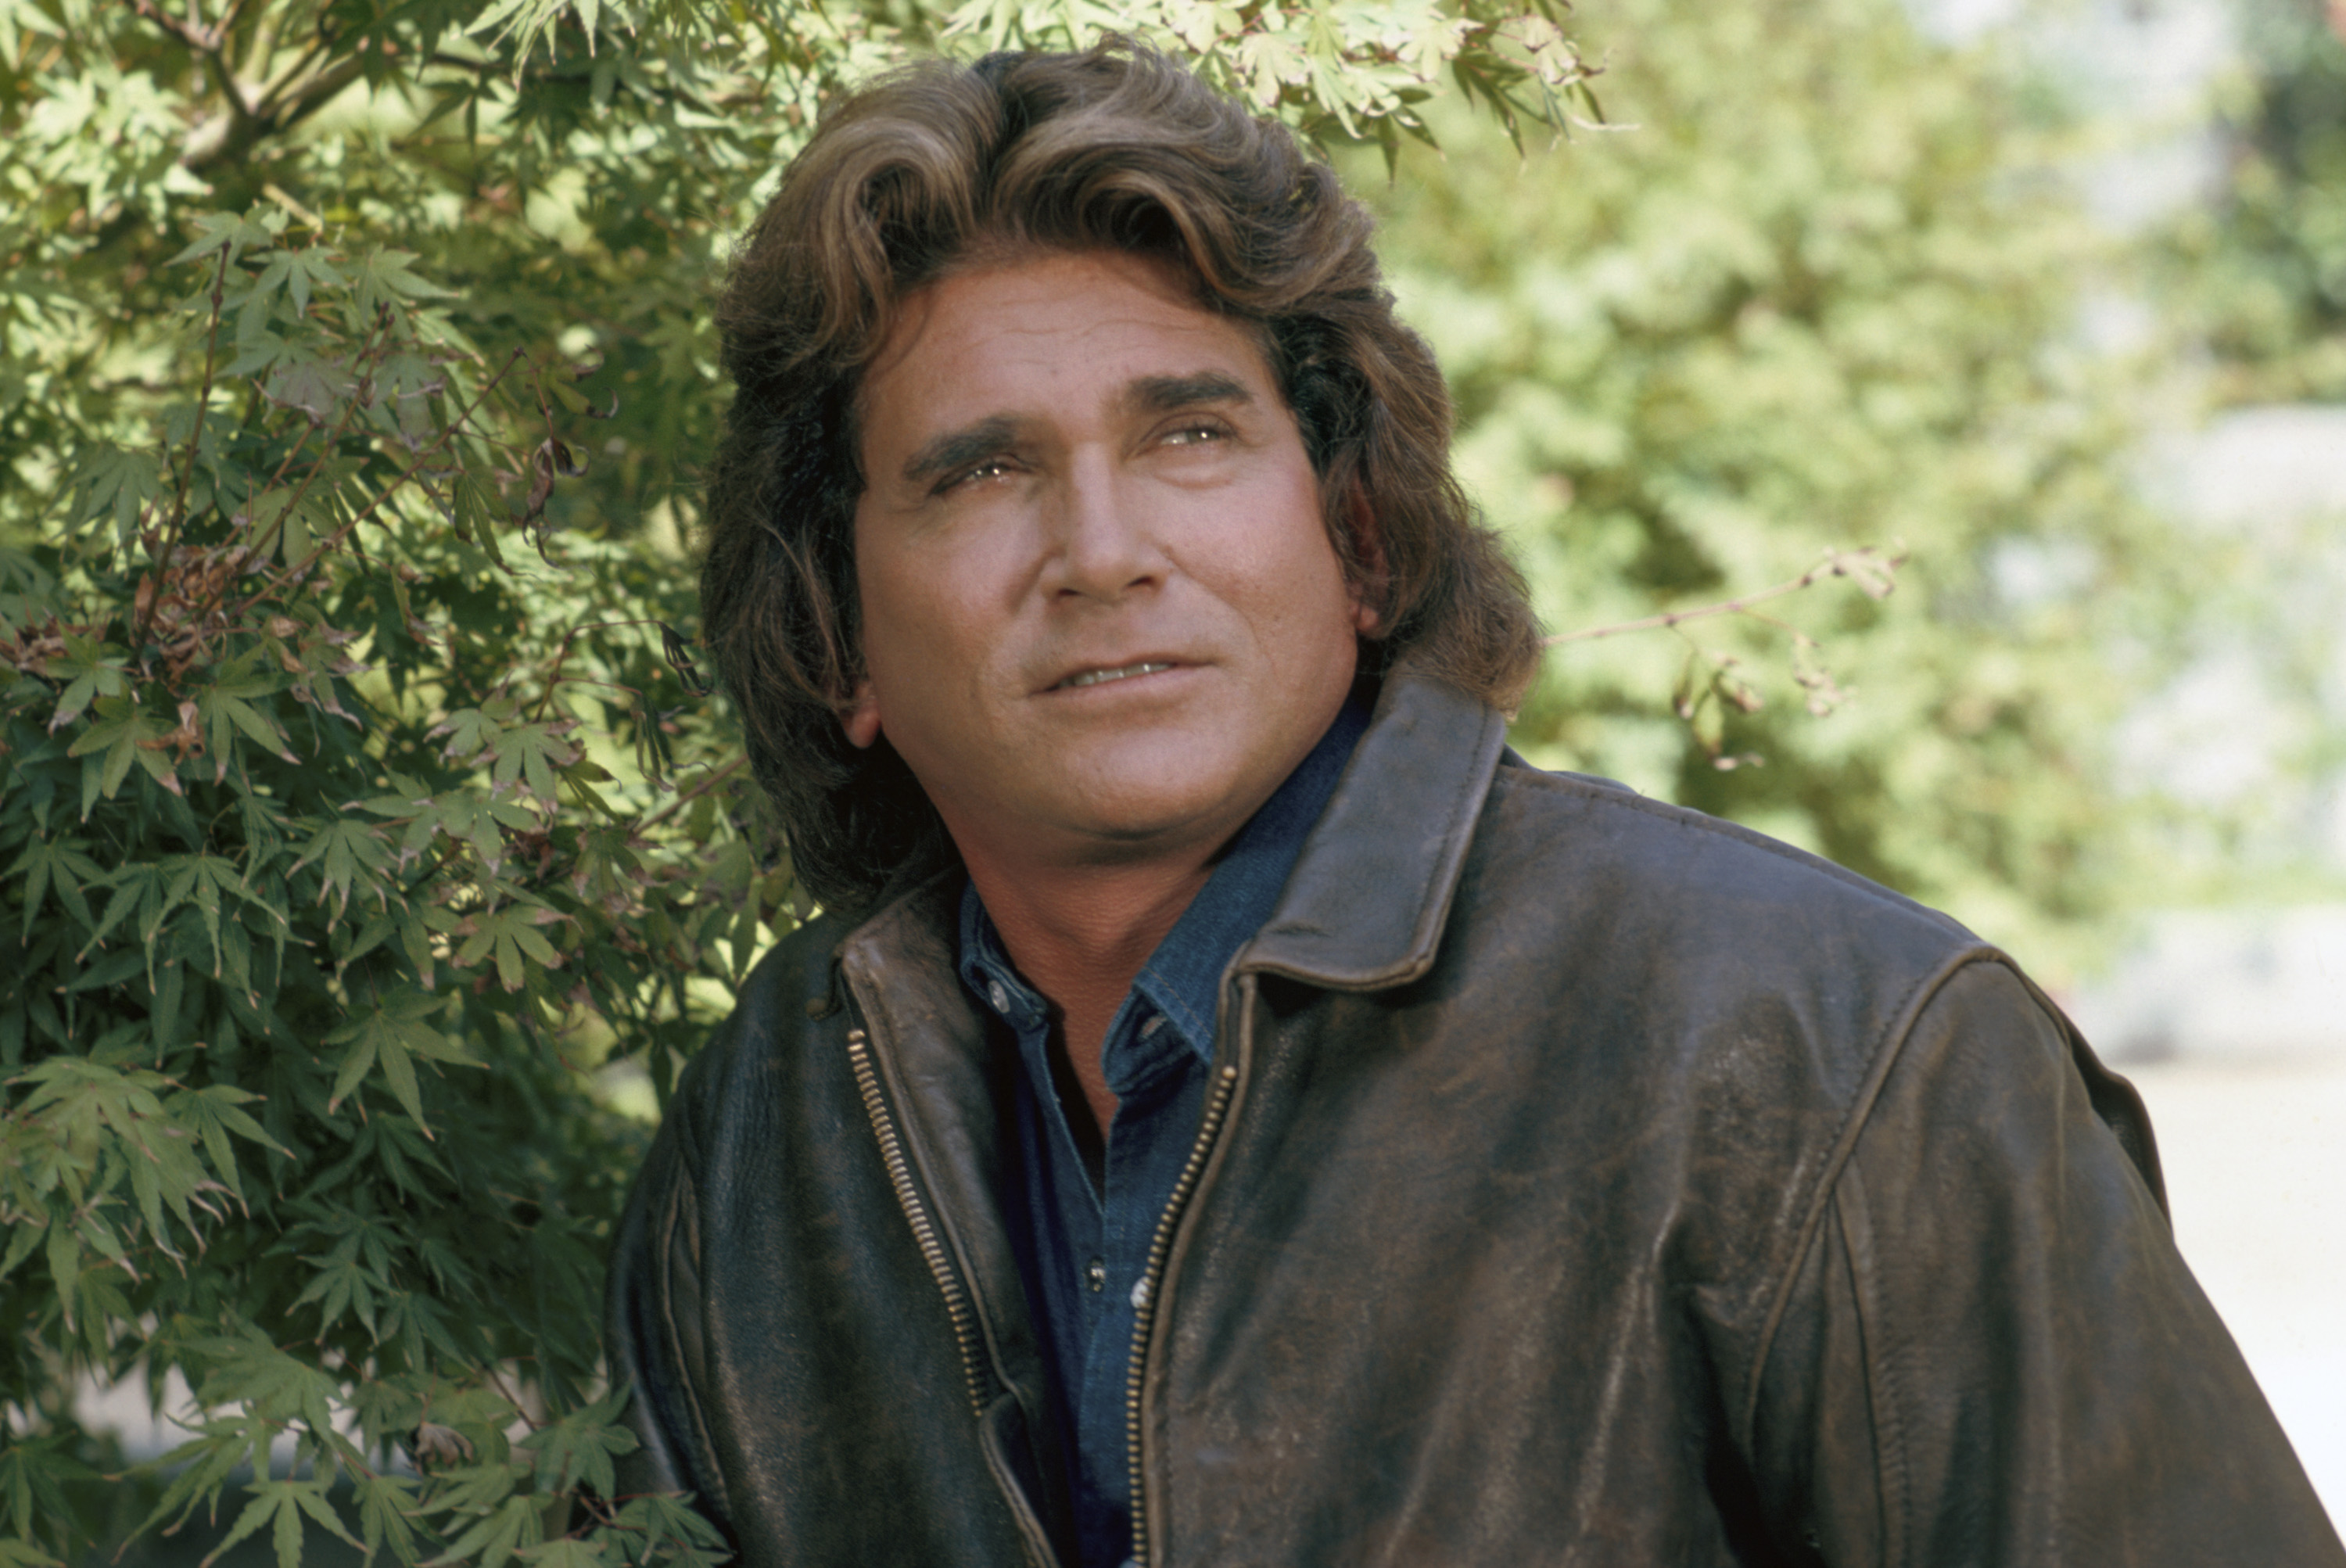 Michael Landon on Highway to Heaven | Frank Carroll/NBCU Photo Bank/NBCUniversal via Getty Images via Getty Images